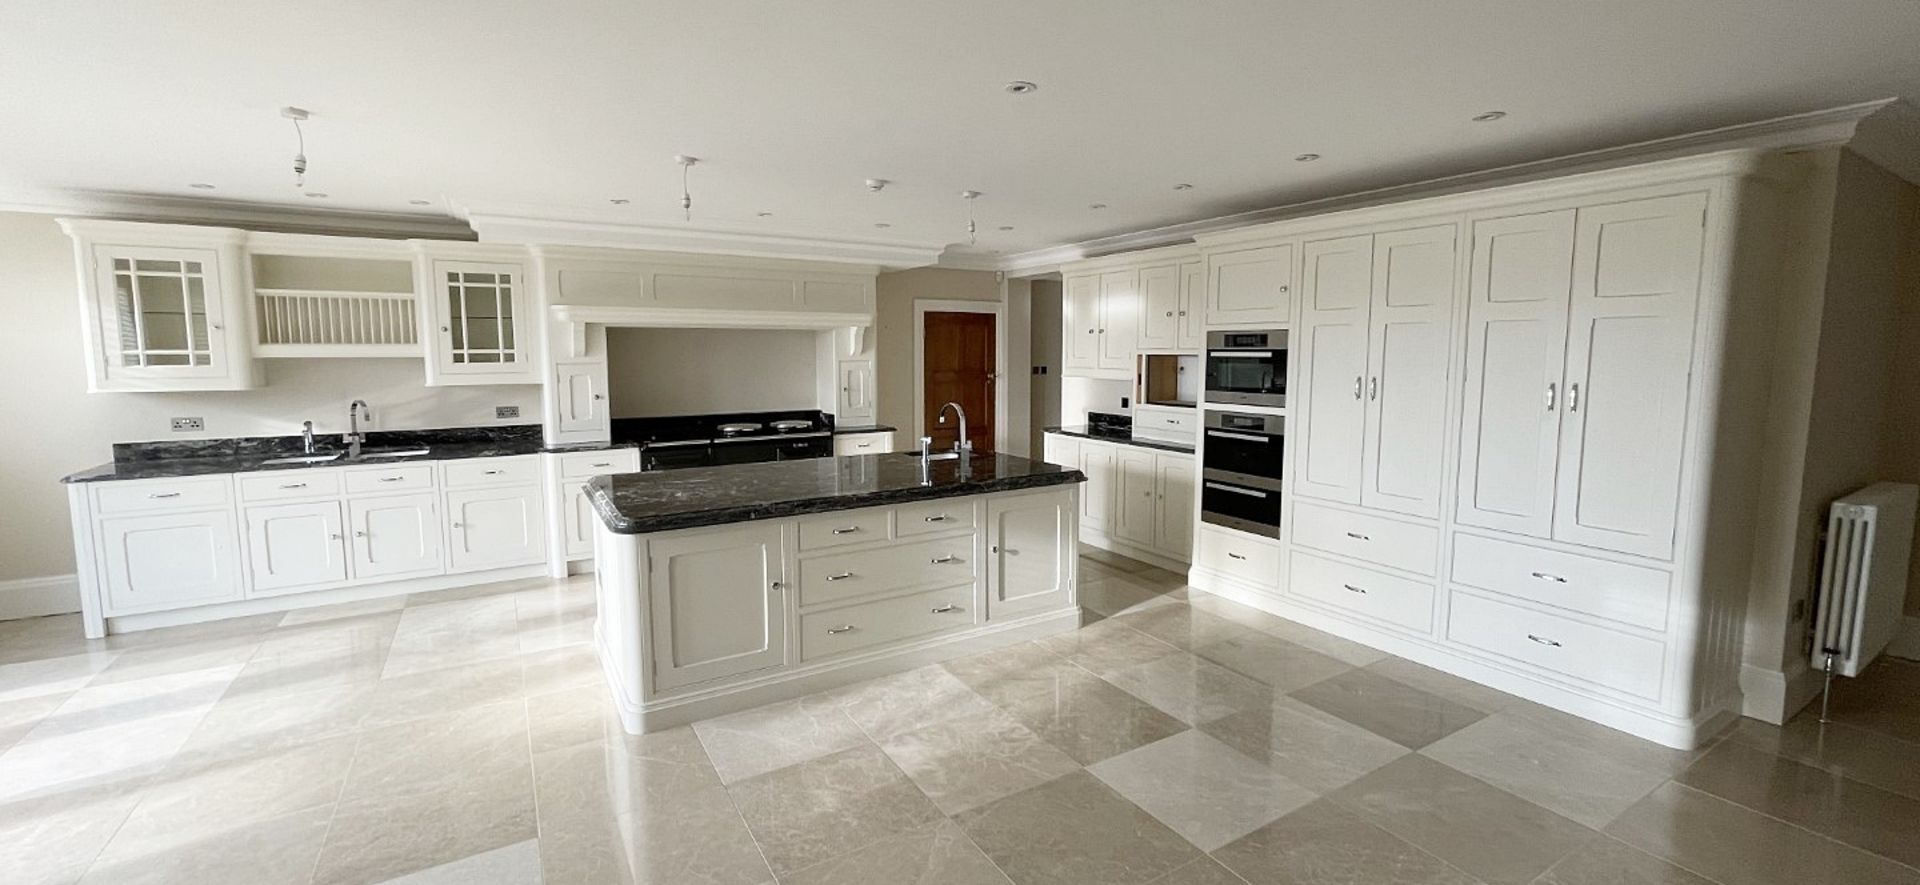 1 x Bespoke Handcrafted Shaker-style Fitted Kitchen Marble Surfaces, Island & Miele Appliances - Image 2 of 221